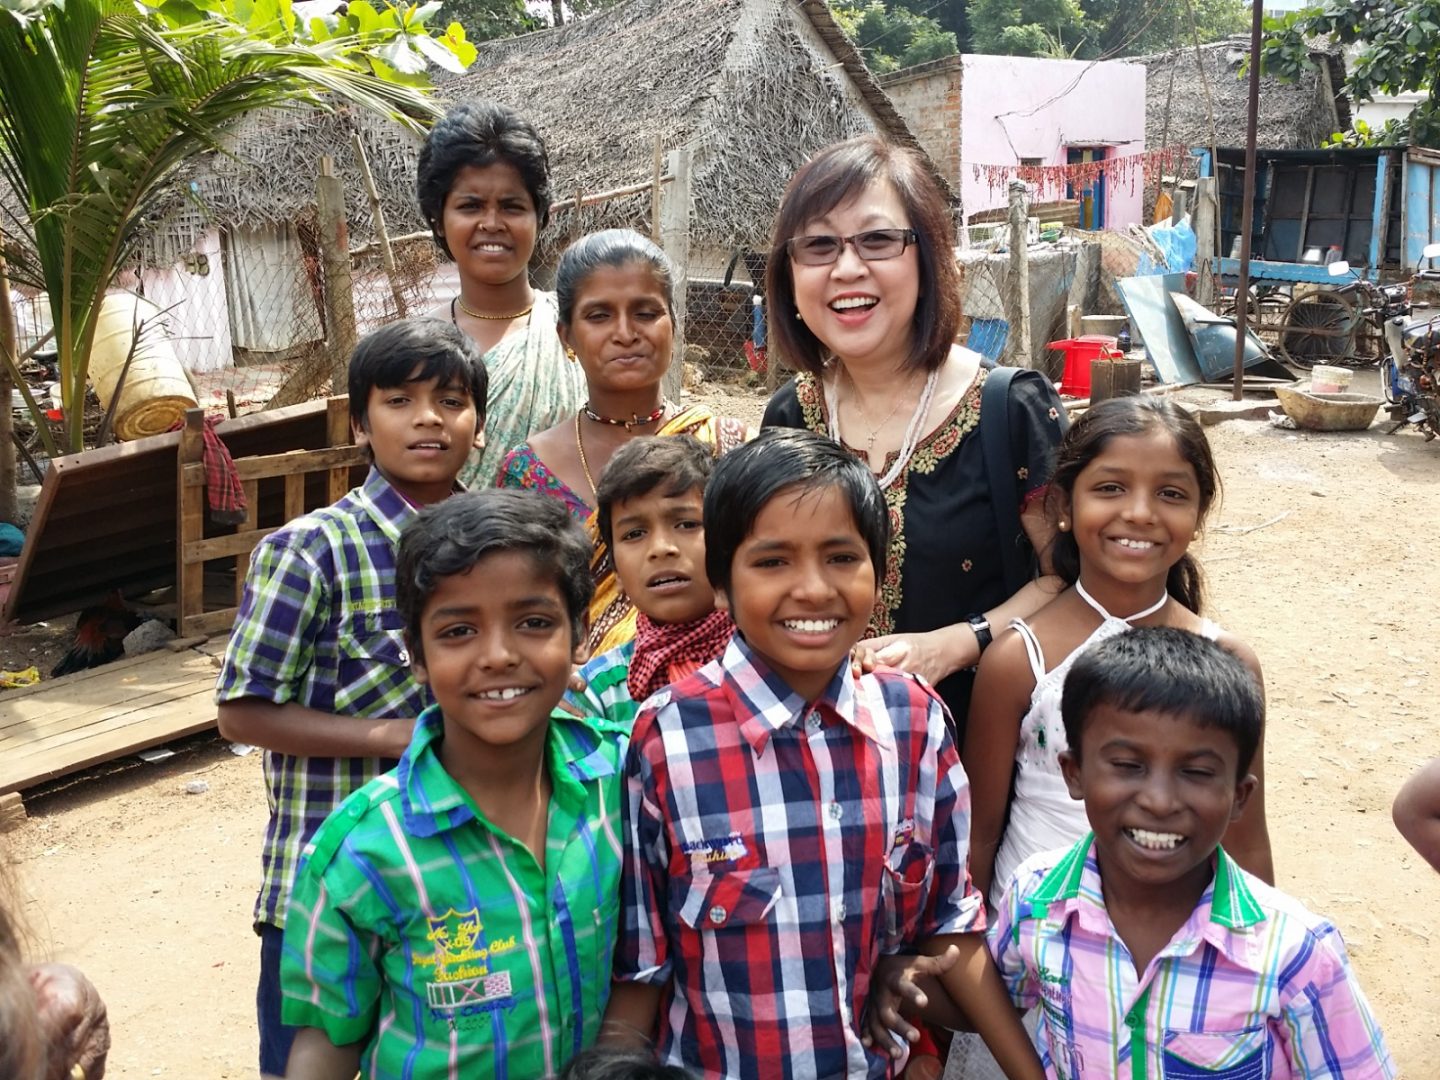 Lim travelled frequently in her work as Director of VisionTrust Asia. Here, she is pictured in India.